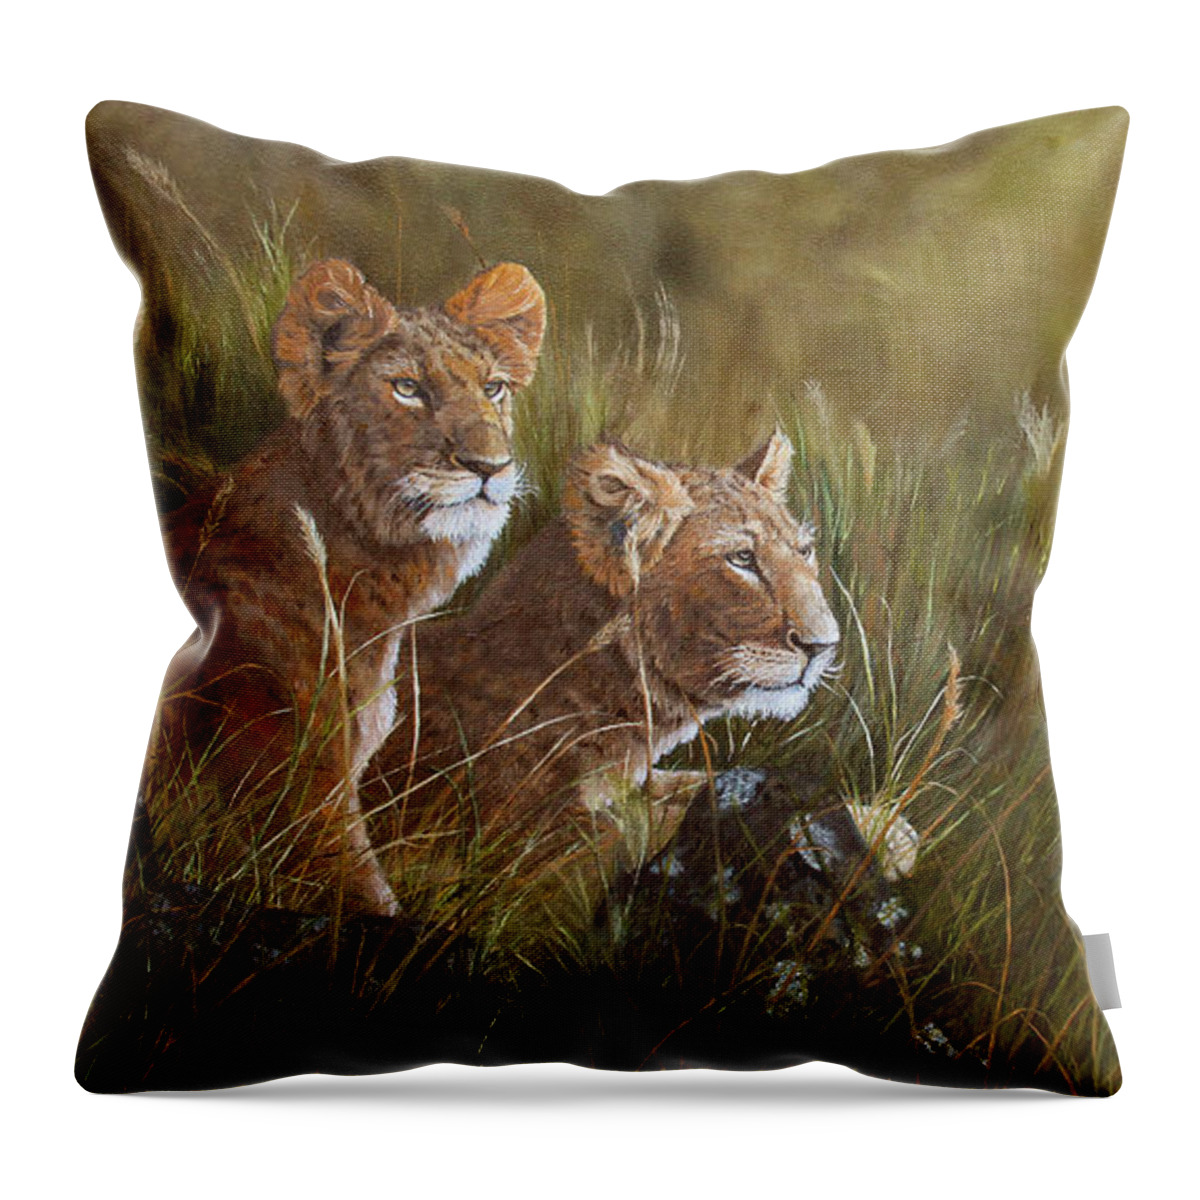 African Wildlife Throw Pillow featuring the painting Curious Anticipation by Johanna Lerwick